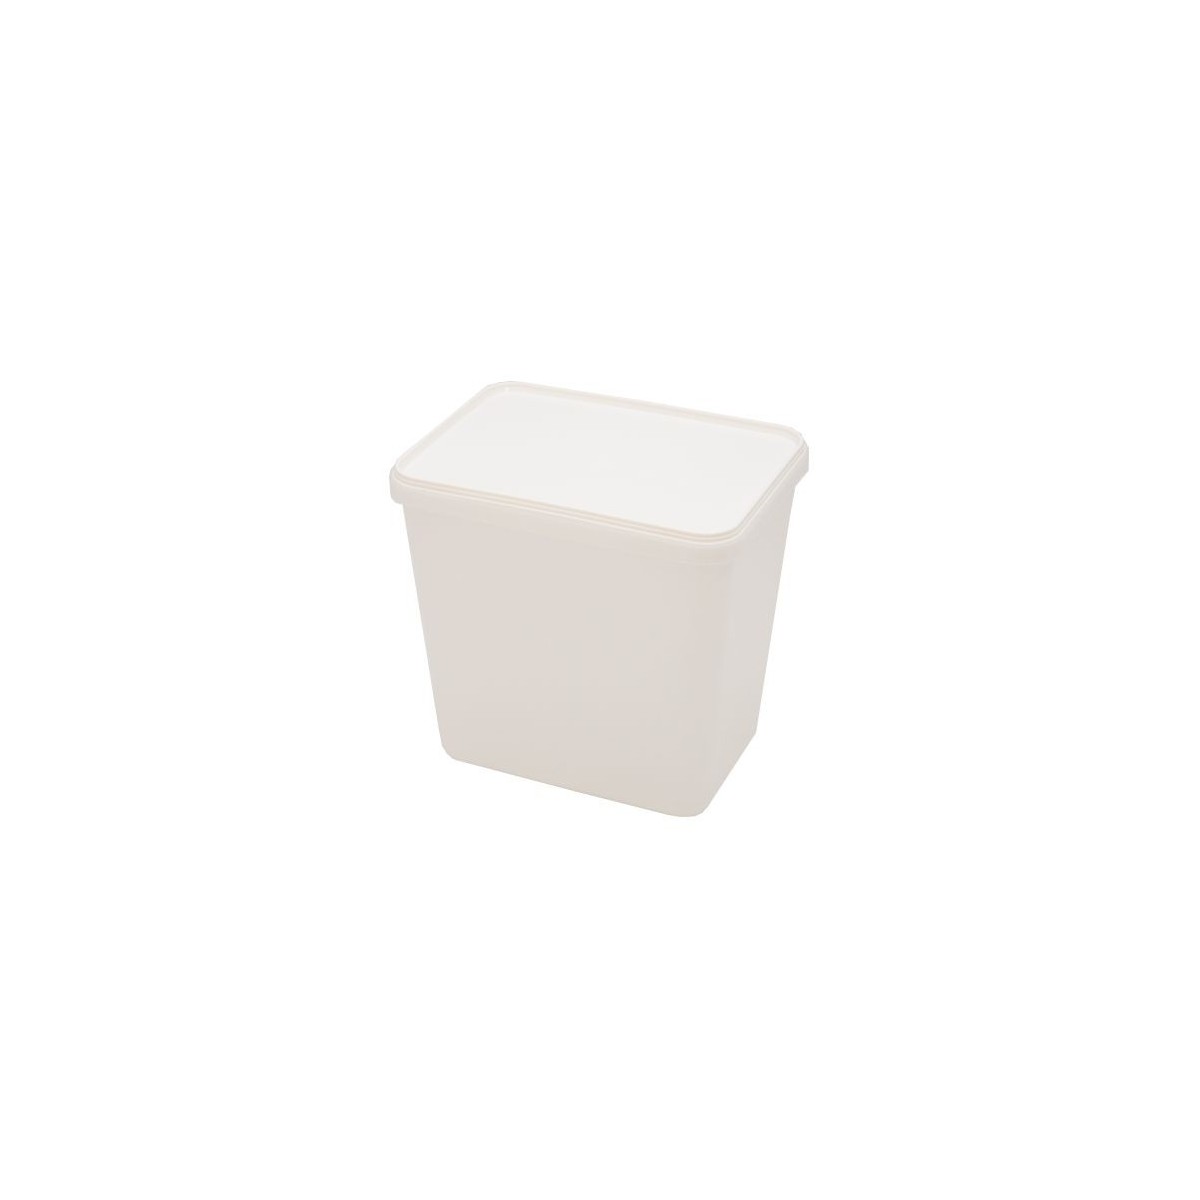 PLASTIC ICE CREAM BOX 5L WITHOUT LID 88 PIECES FOST+2020 INCLUDED 6,54304€  BOX